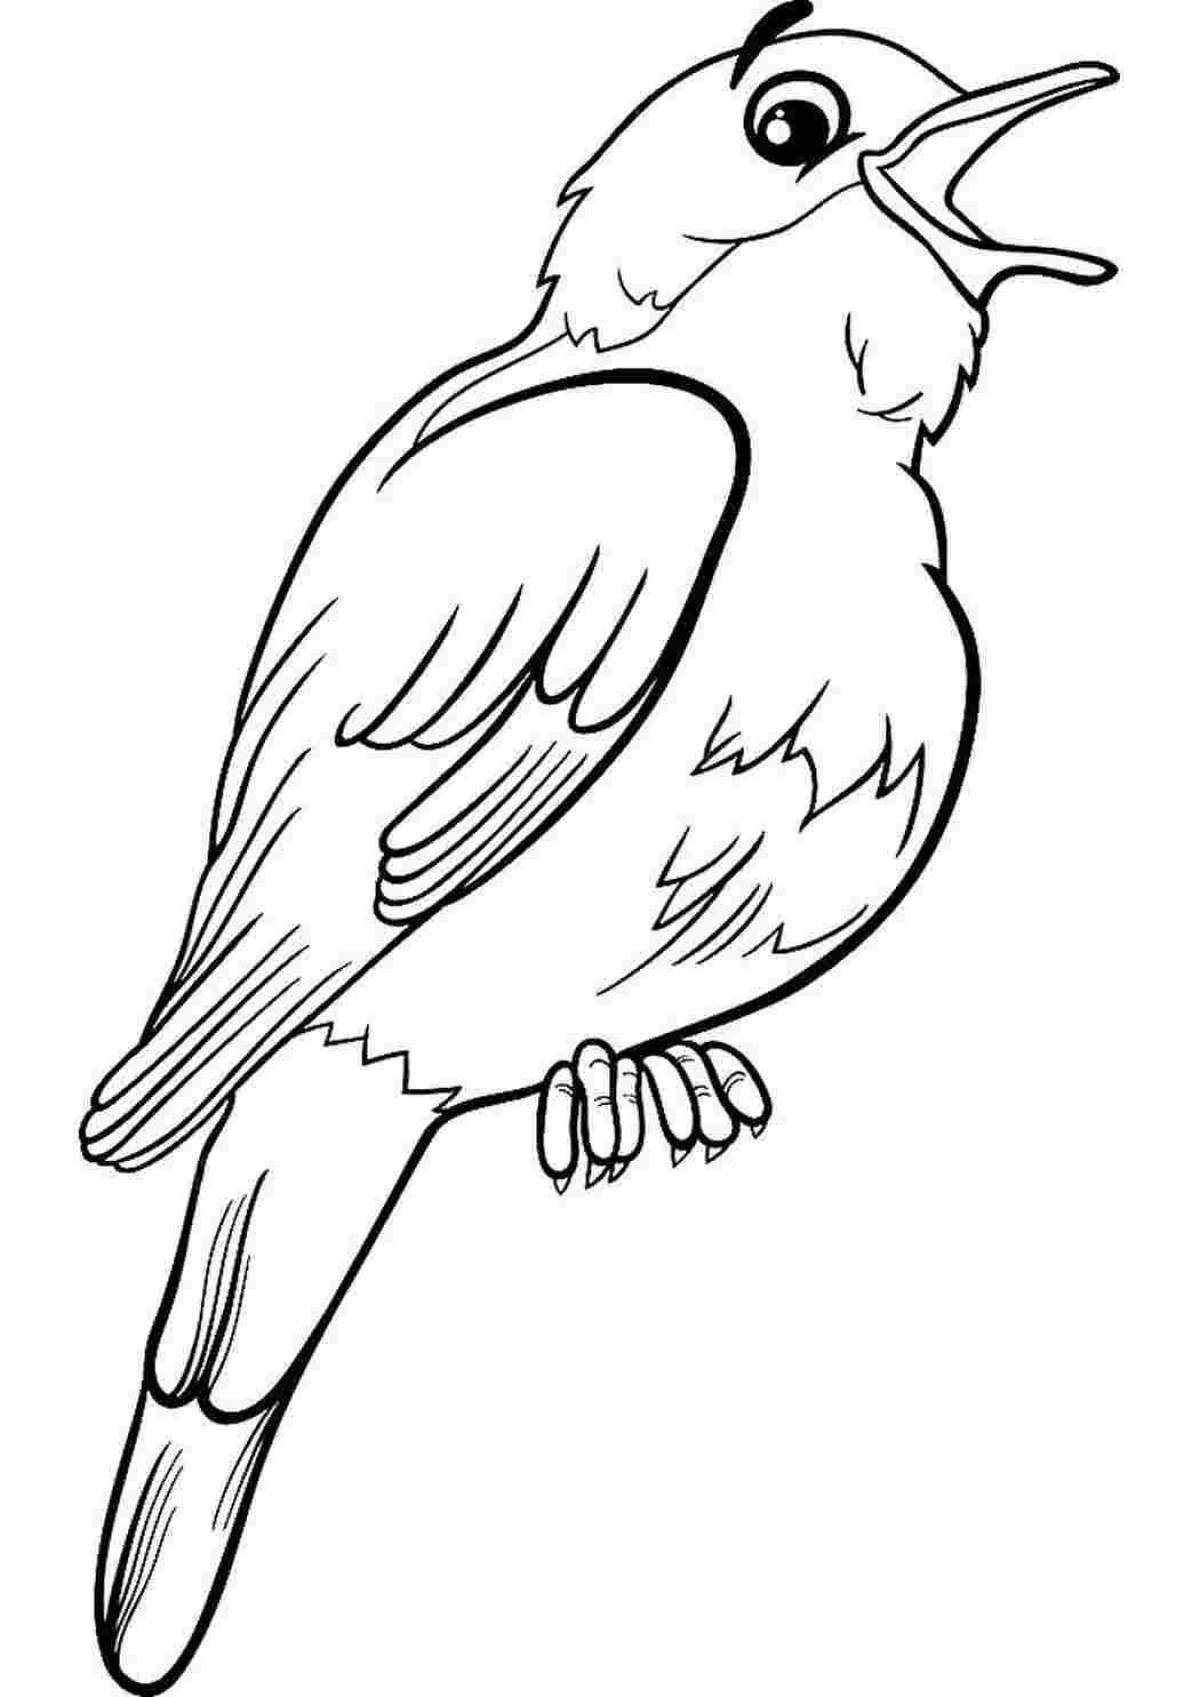 Adorable nightingale coloring page